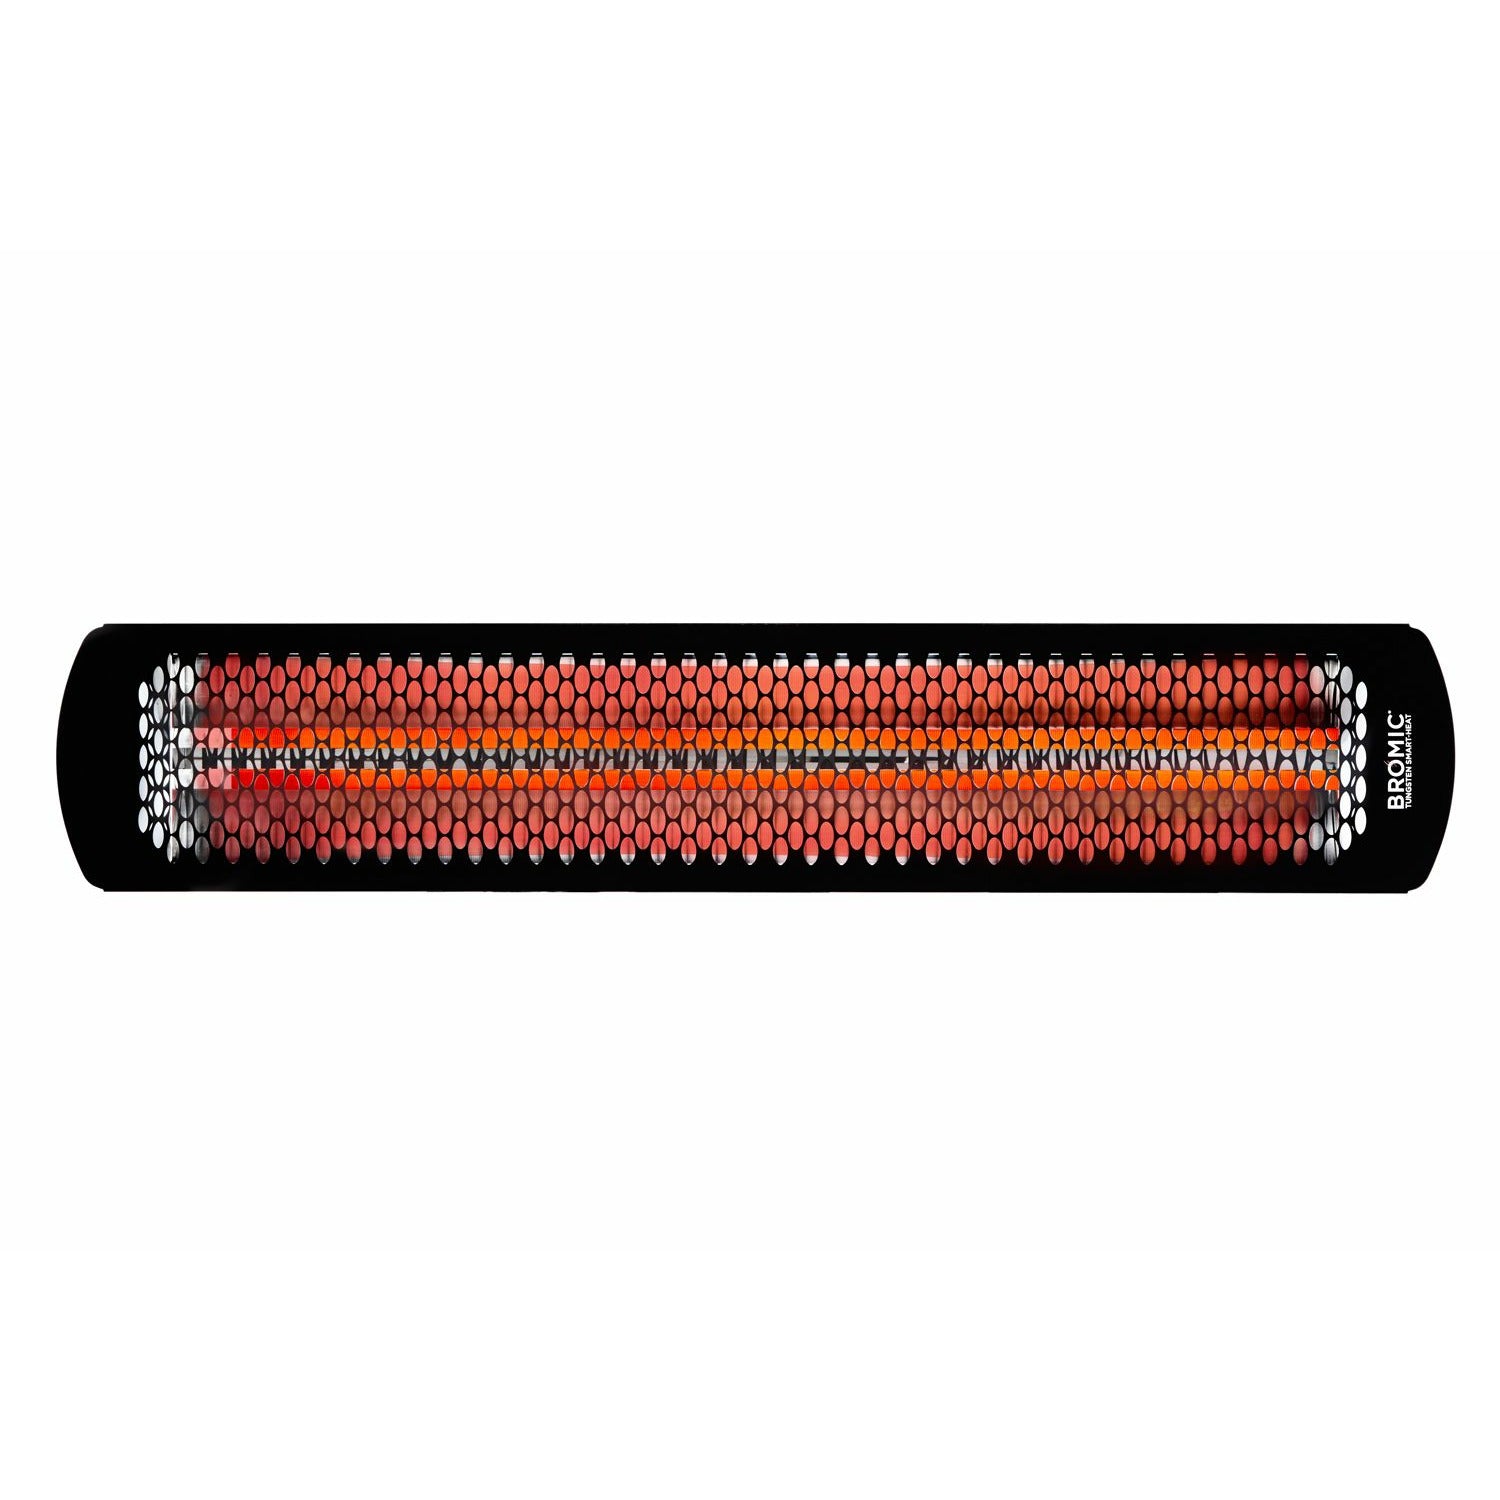 4000W Tungsten Smart-Heat Electric Patio Heater in Black Stainless Steel, Black High Temperature Coating in white background